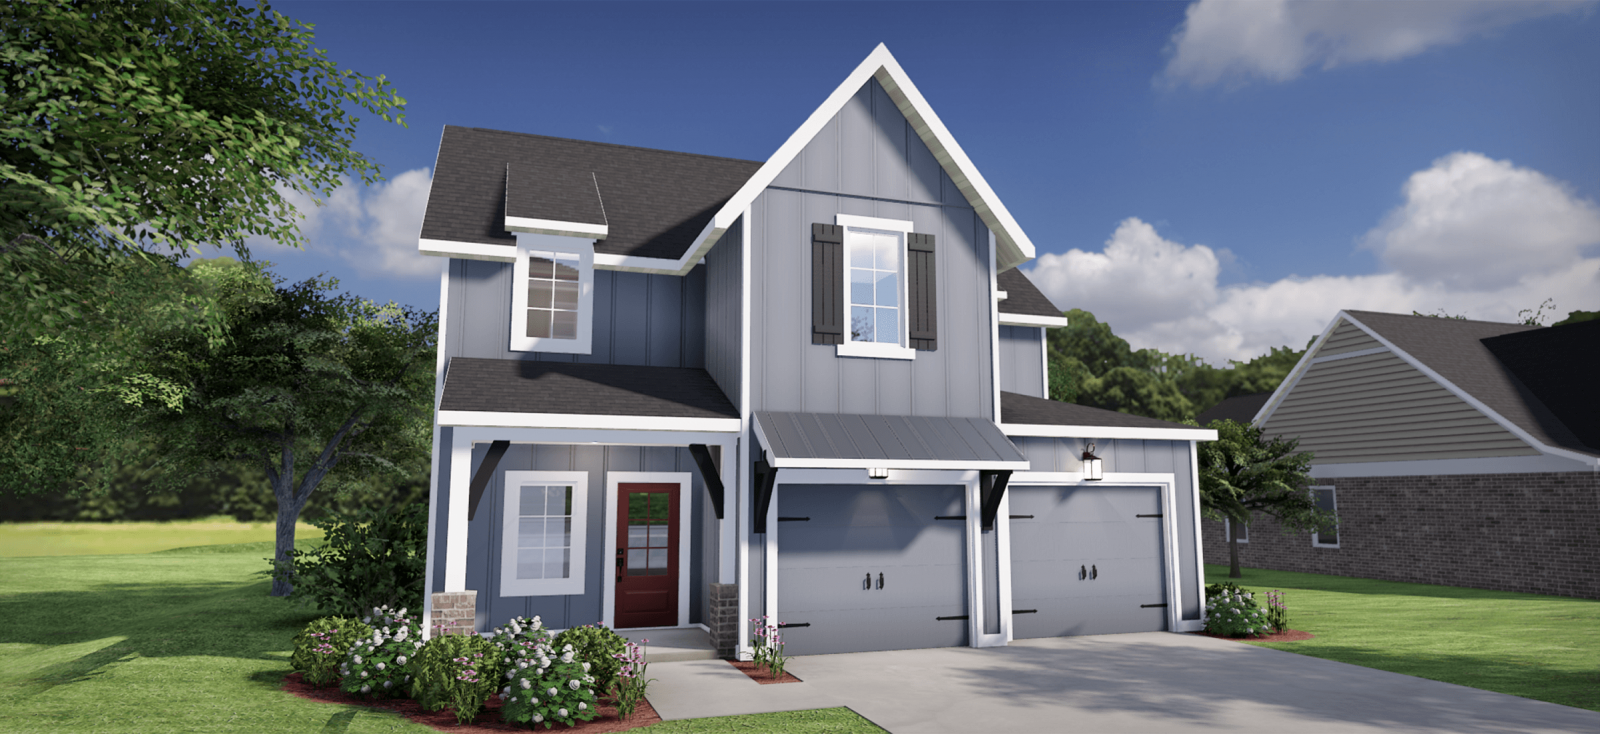 Brexton 1A Model-The Hills at Chelsea's Way, Cross Plains TN Homes for Sale